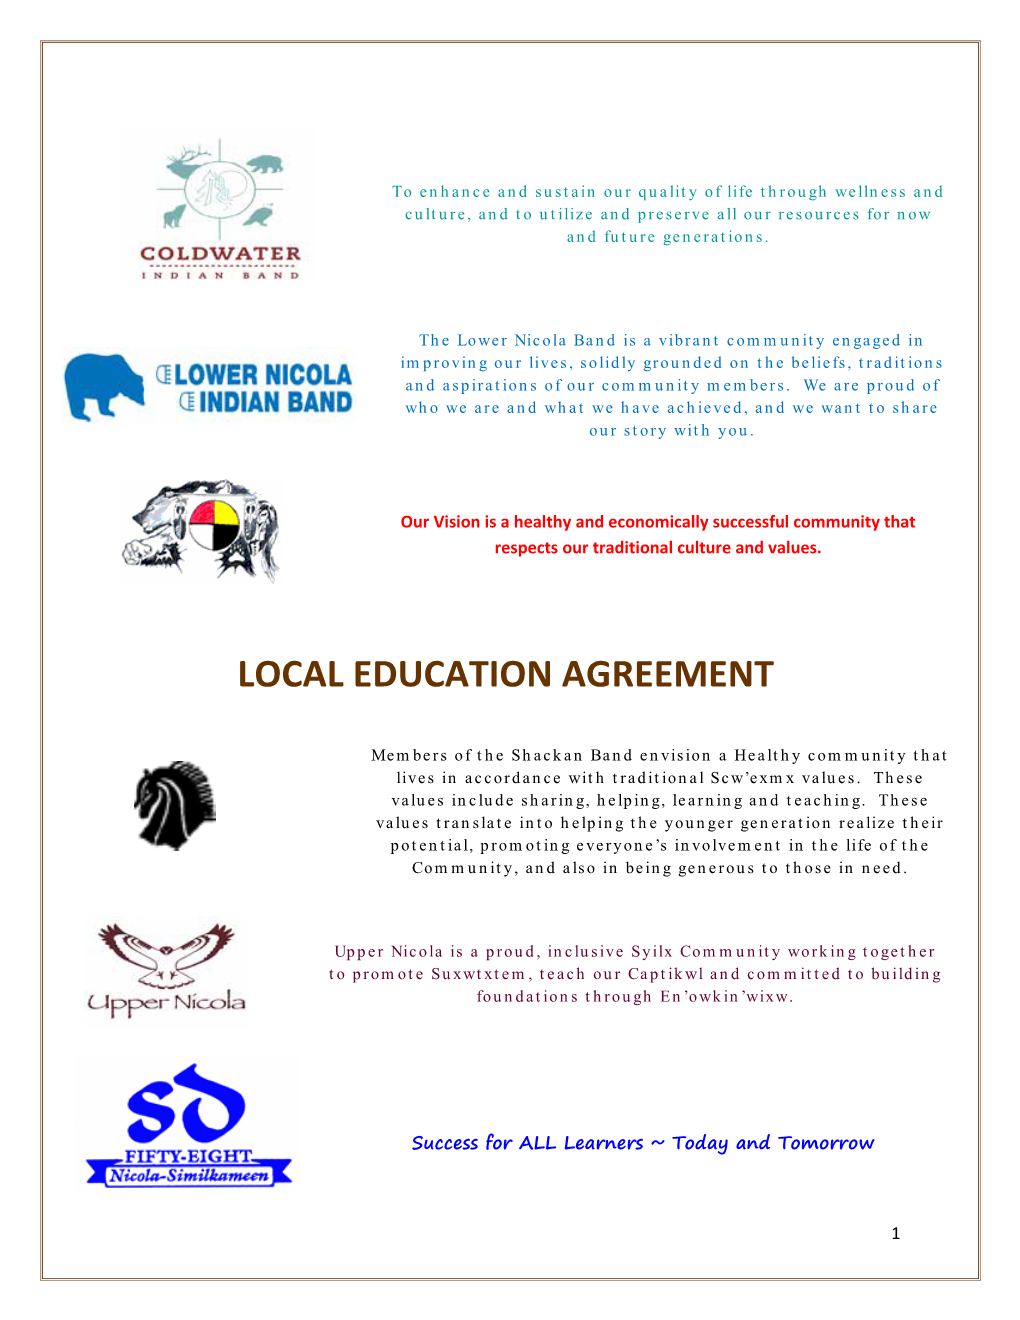 Local Education Agreement